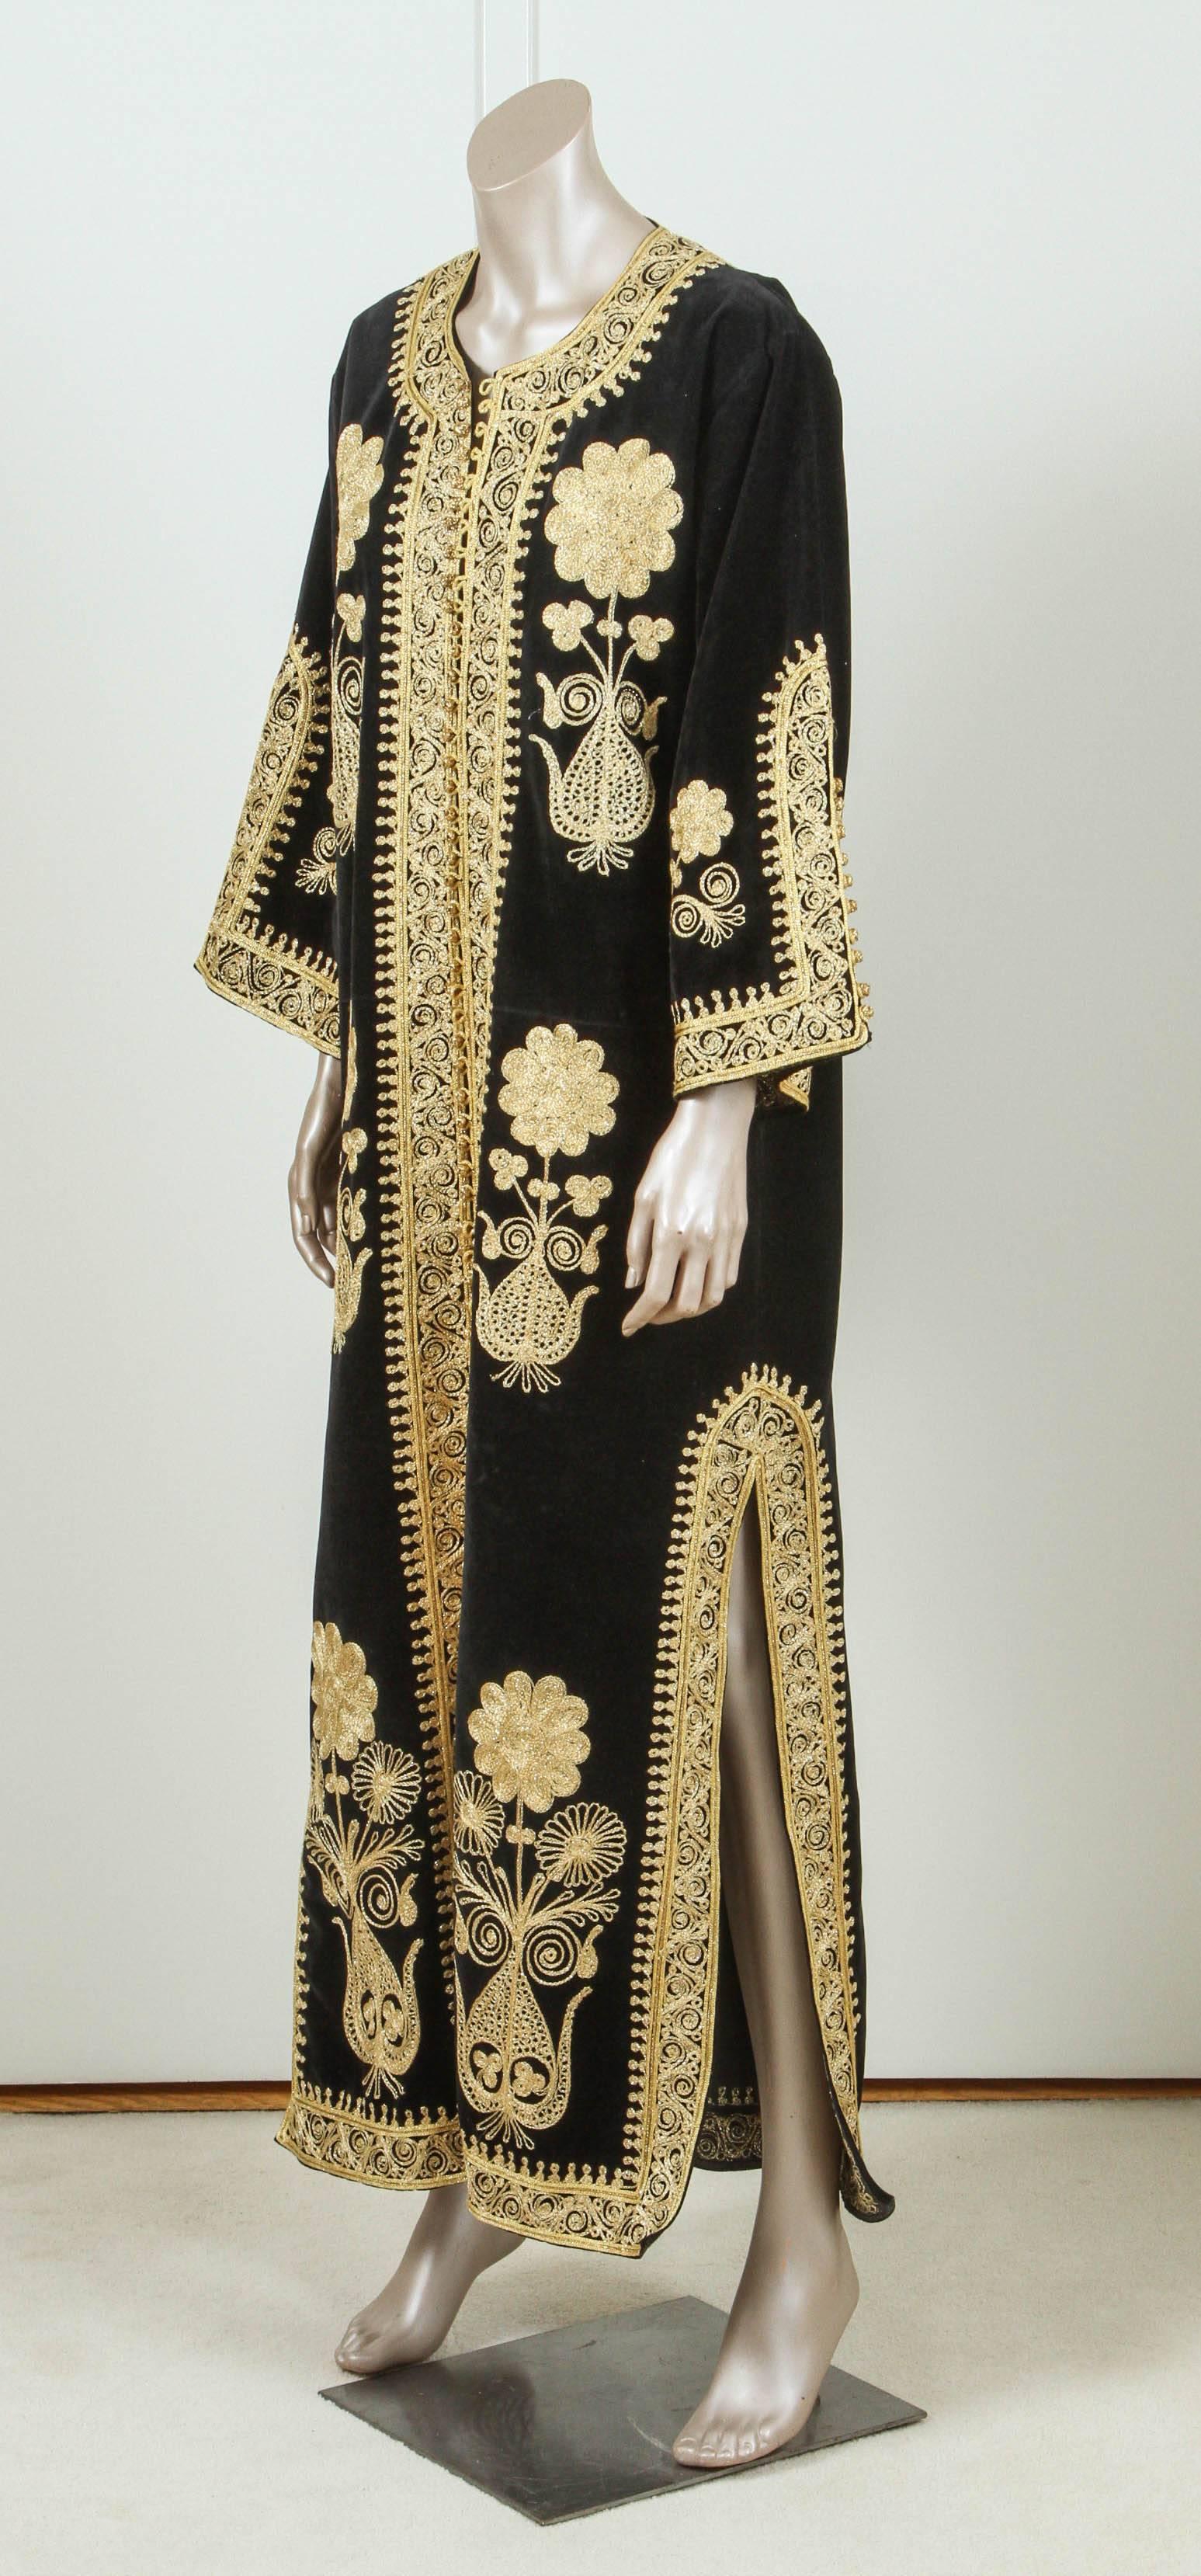 Hand-Crafted Moroccan Caftan, Black Kaftan Embroidered with Gold